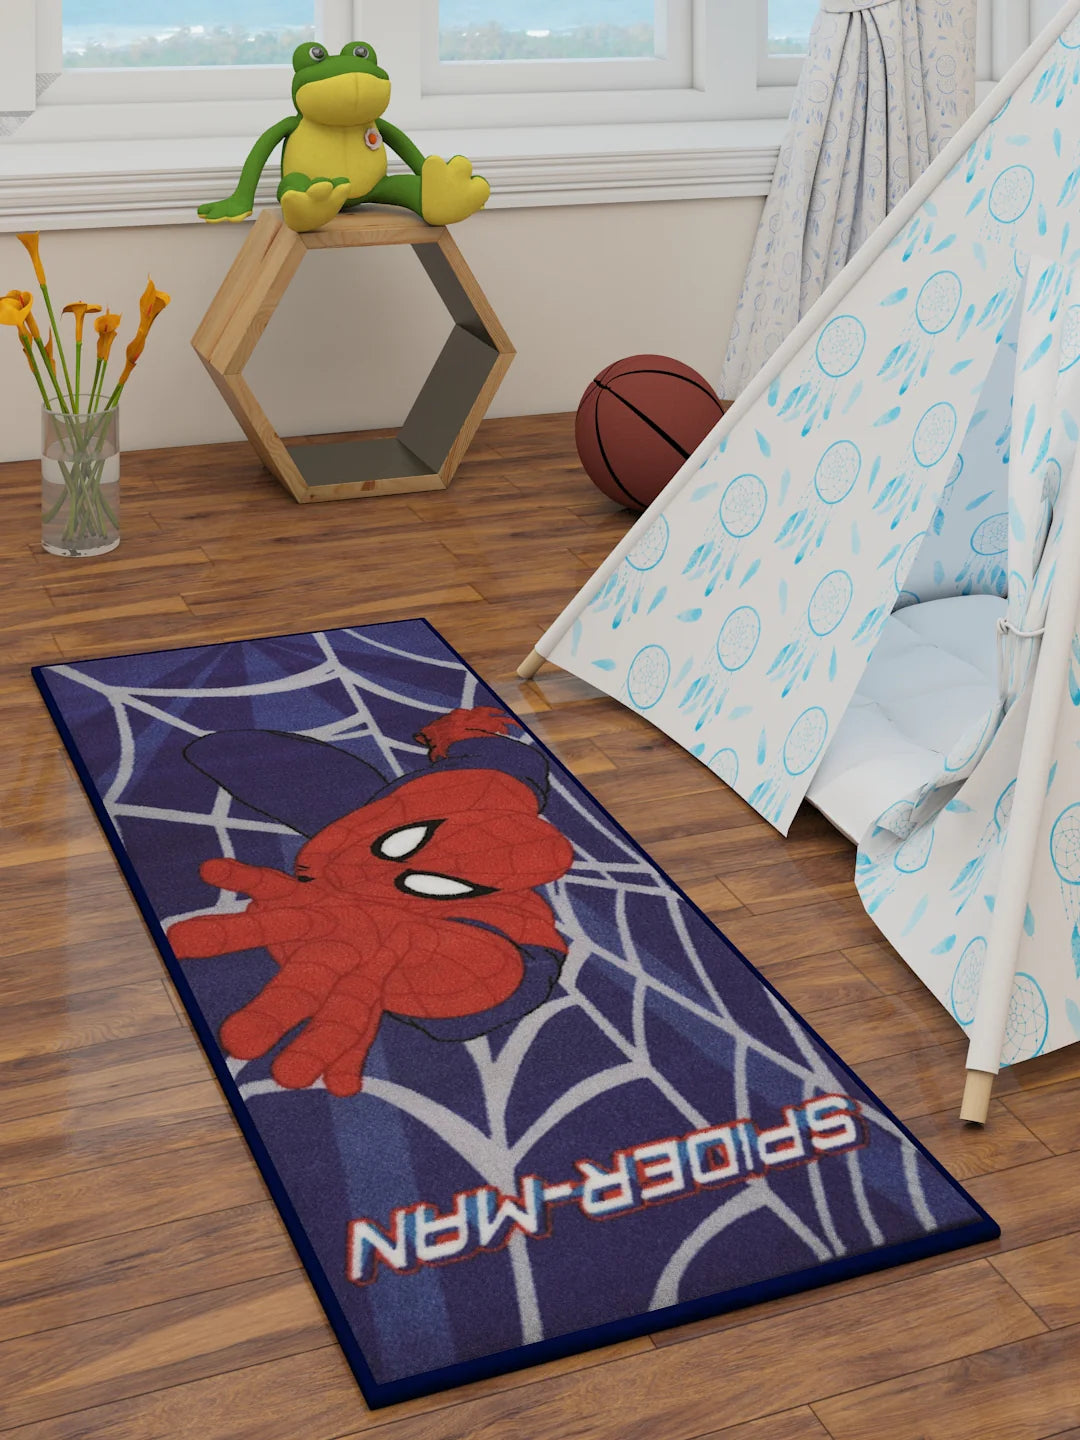 Swing into Action with Marvel's Spiderman Kids Runner Carpet